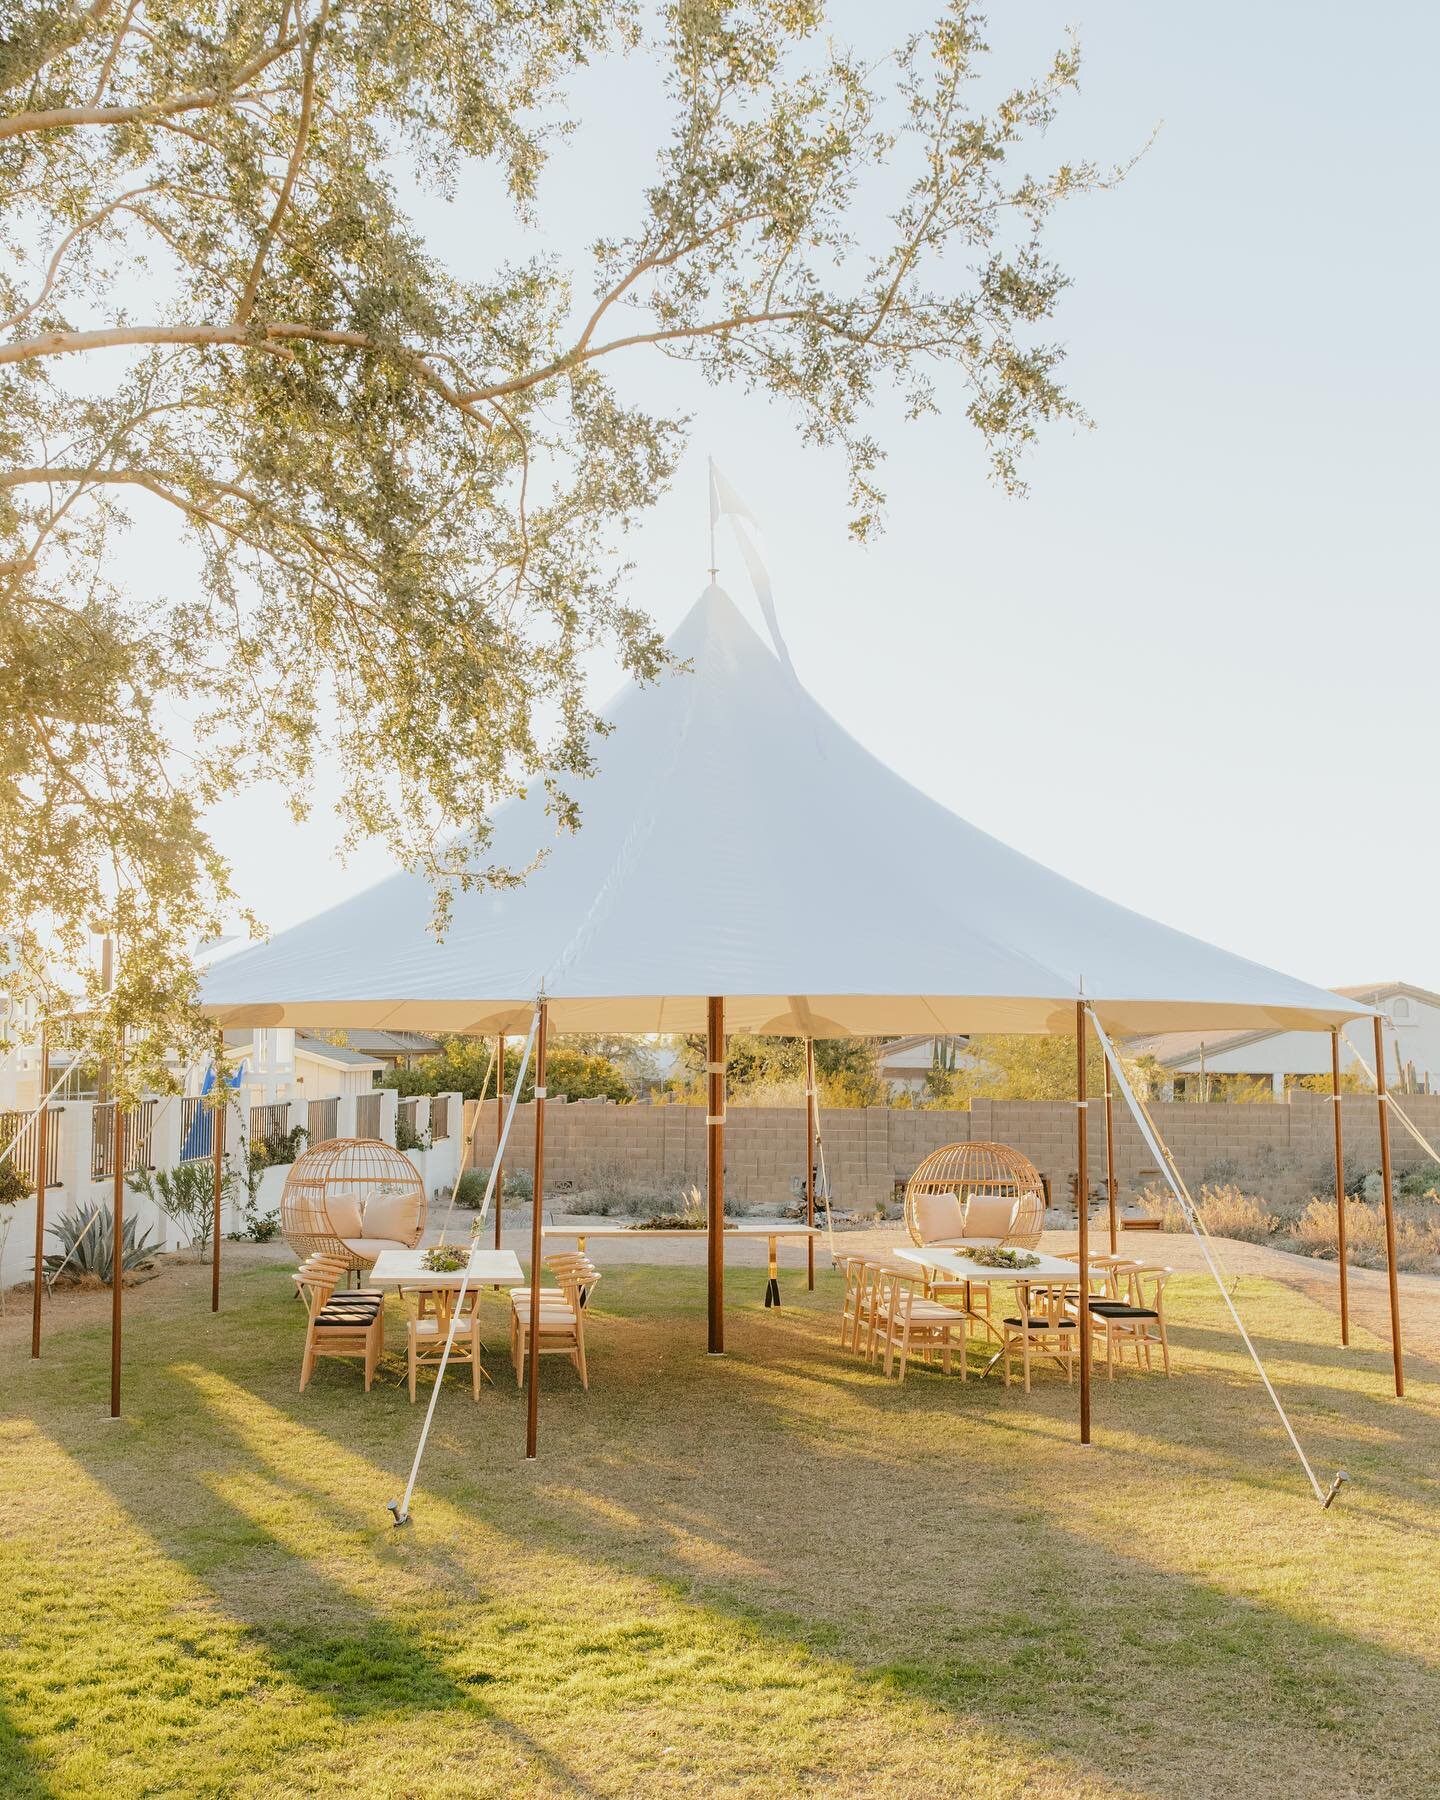 Excited to introduce you to our Petite Tent line!! This line is perfect for smaller events and smaller spaces. For those super extra events, add this as an auxiliary/catering tent in tandem with our large tents 🤩

Photographed is our single pole 32&